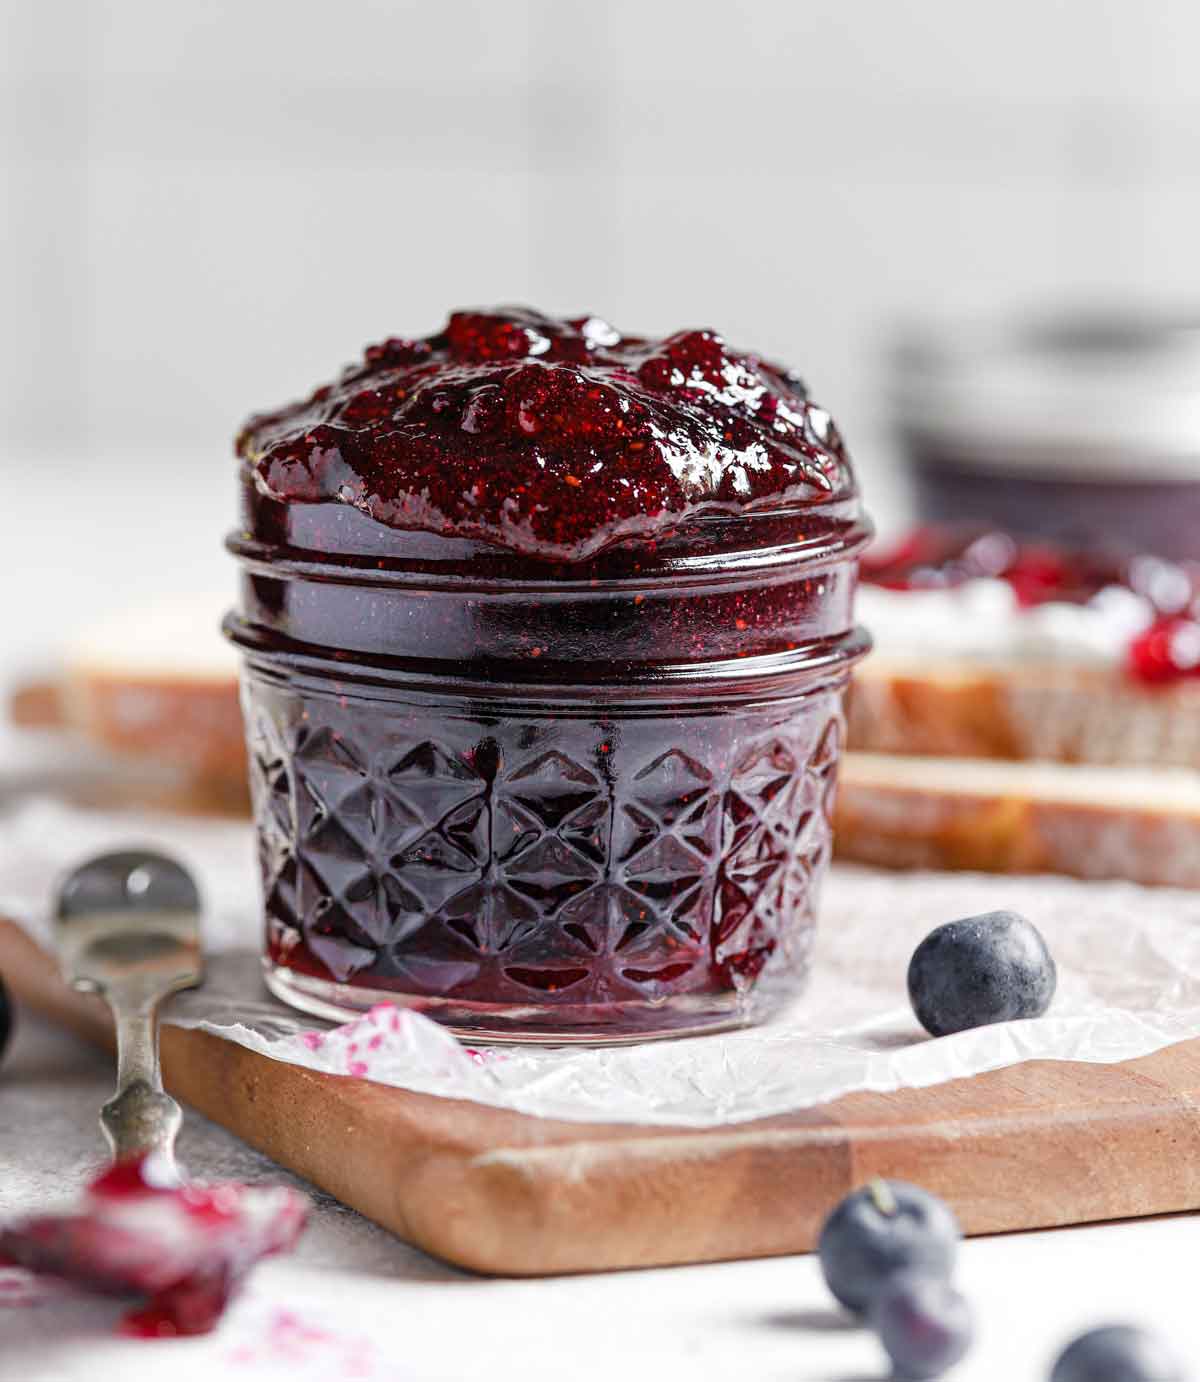 Glass jar of blueberry jam with the jam overflowing over the top.